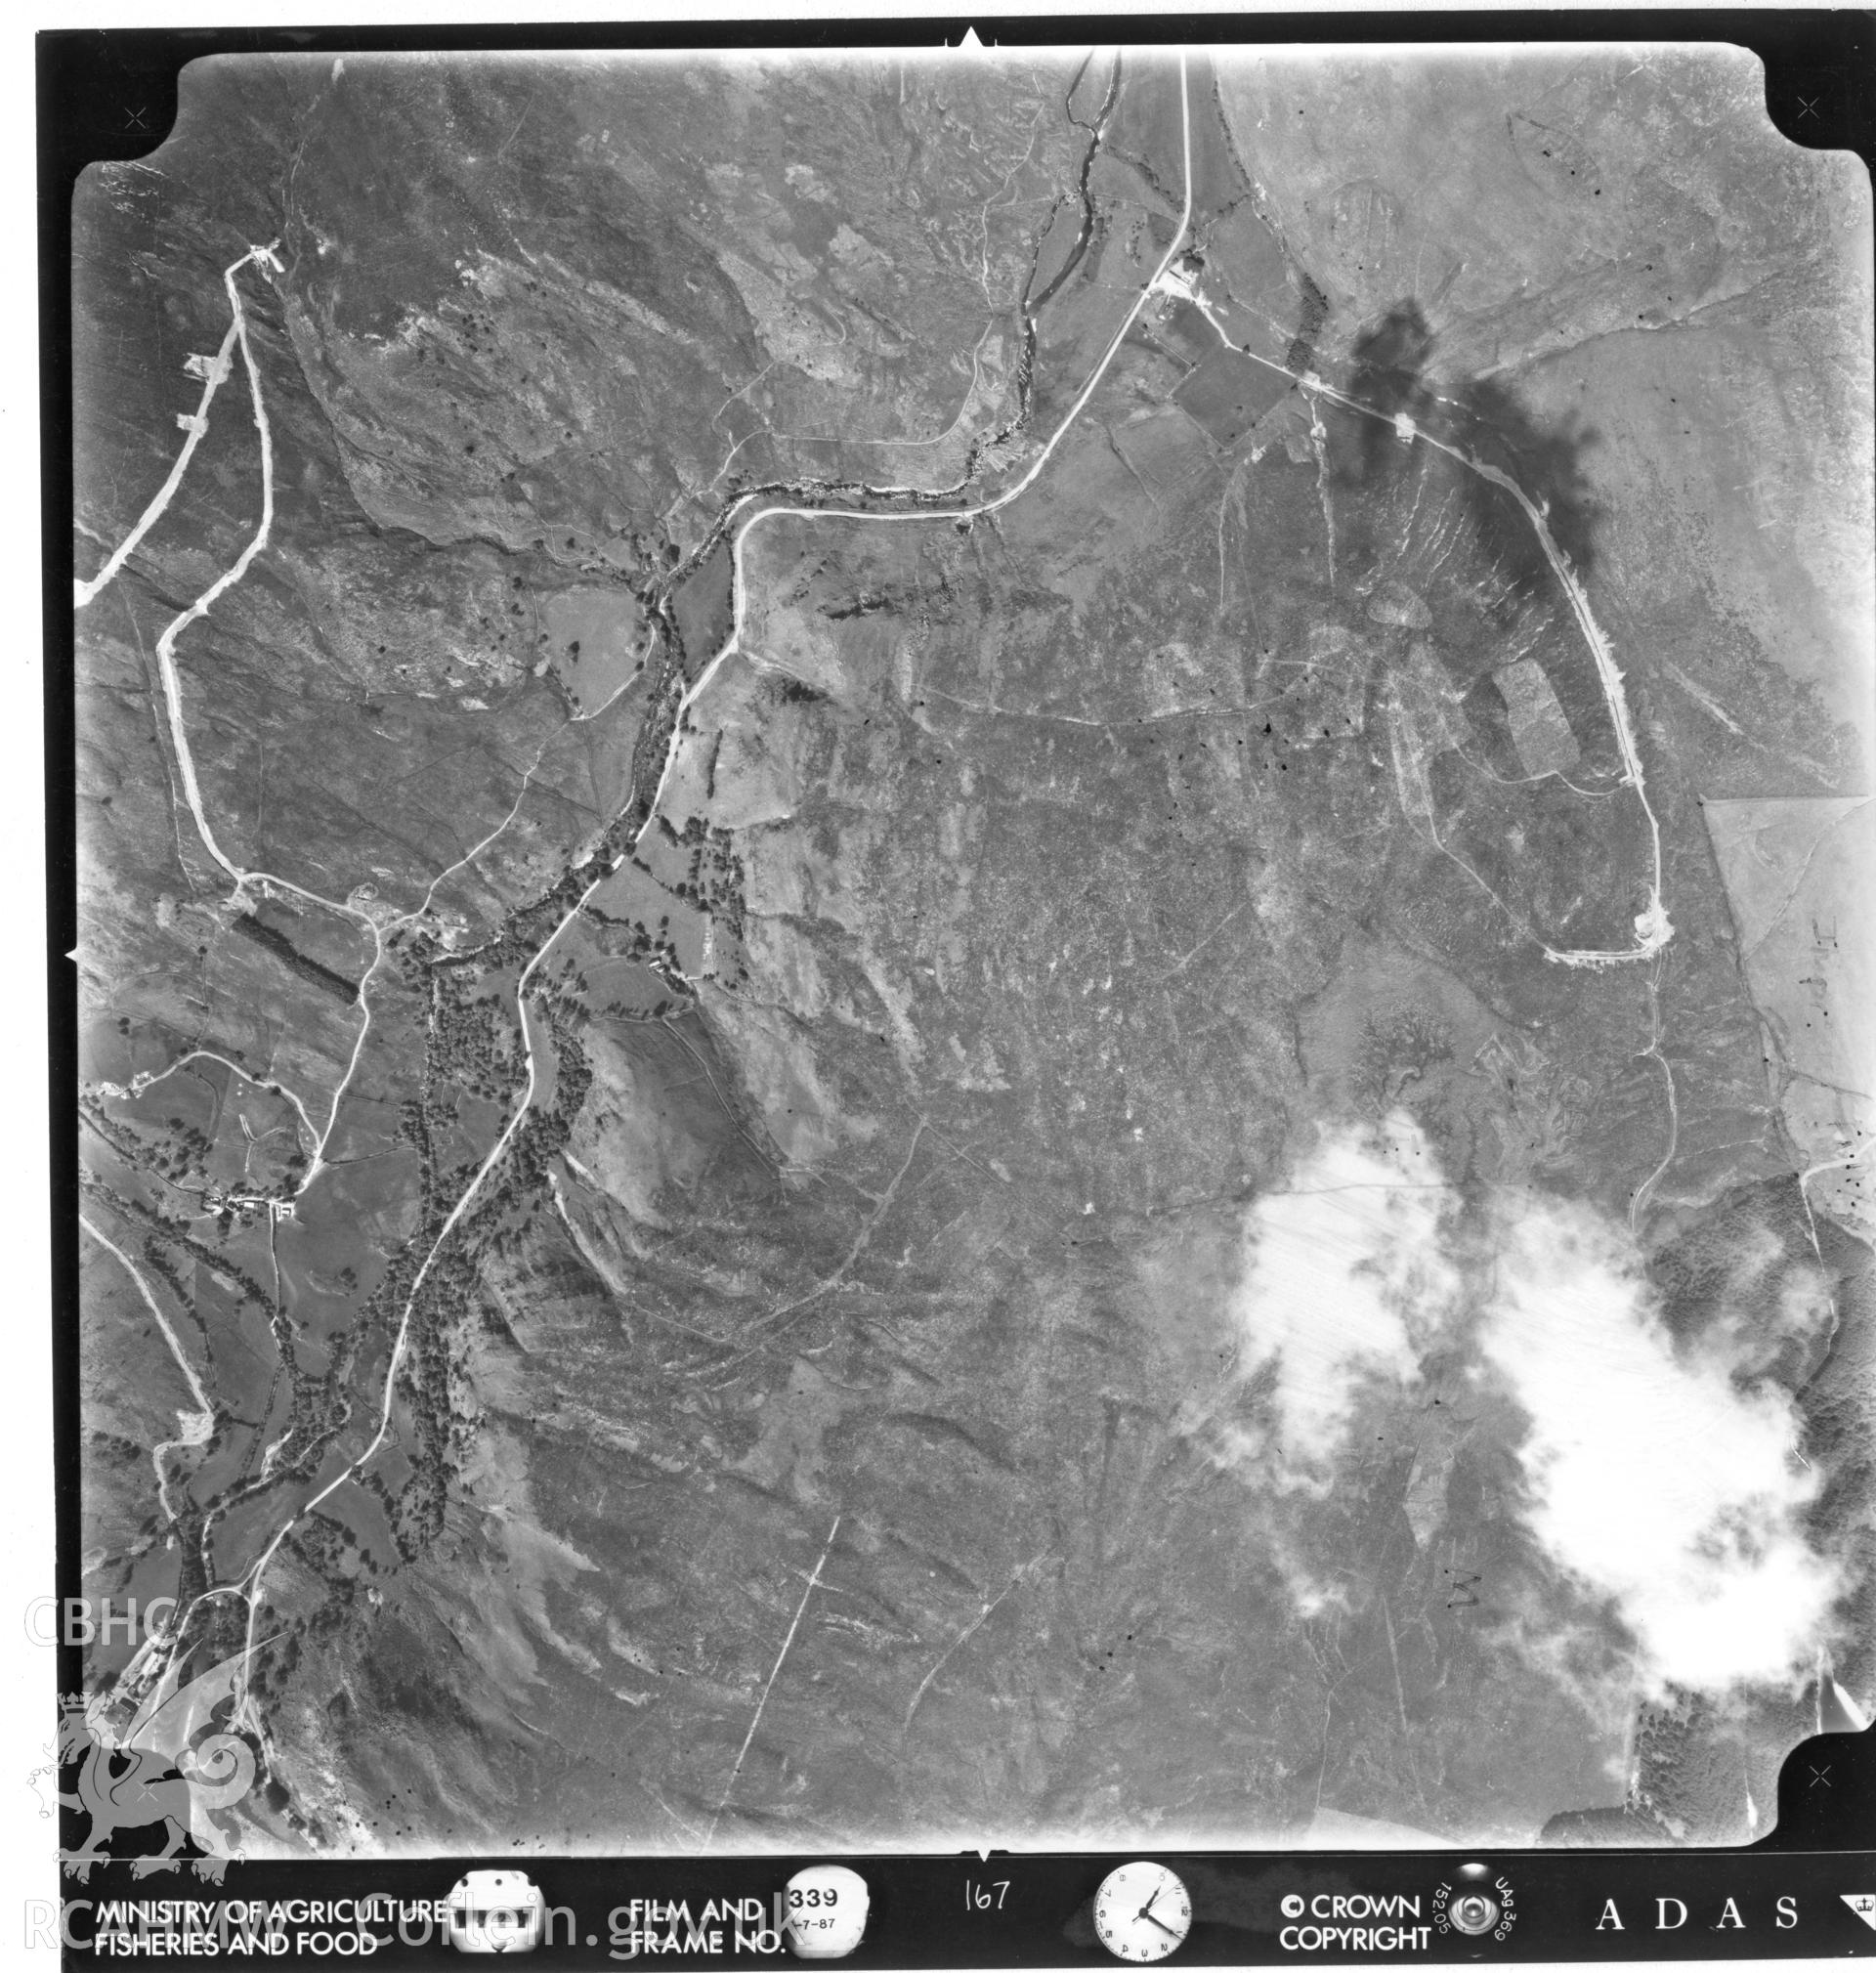 Aerial photograph of the Elan Valley, dated 1987. Included in material relating to Archaeological Desk Based Assessment of Afon Claerwen, Elan Valley, Rhayader, Powys. Assessment conducted by Archaeology Wales in 2017-18. Report no. 1633. Project no. 2573.